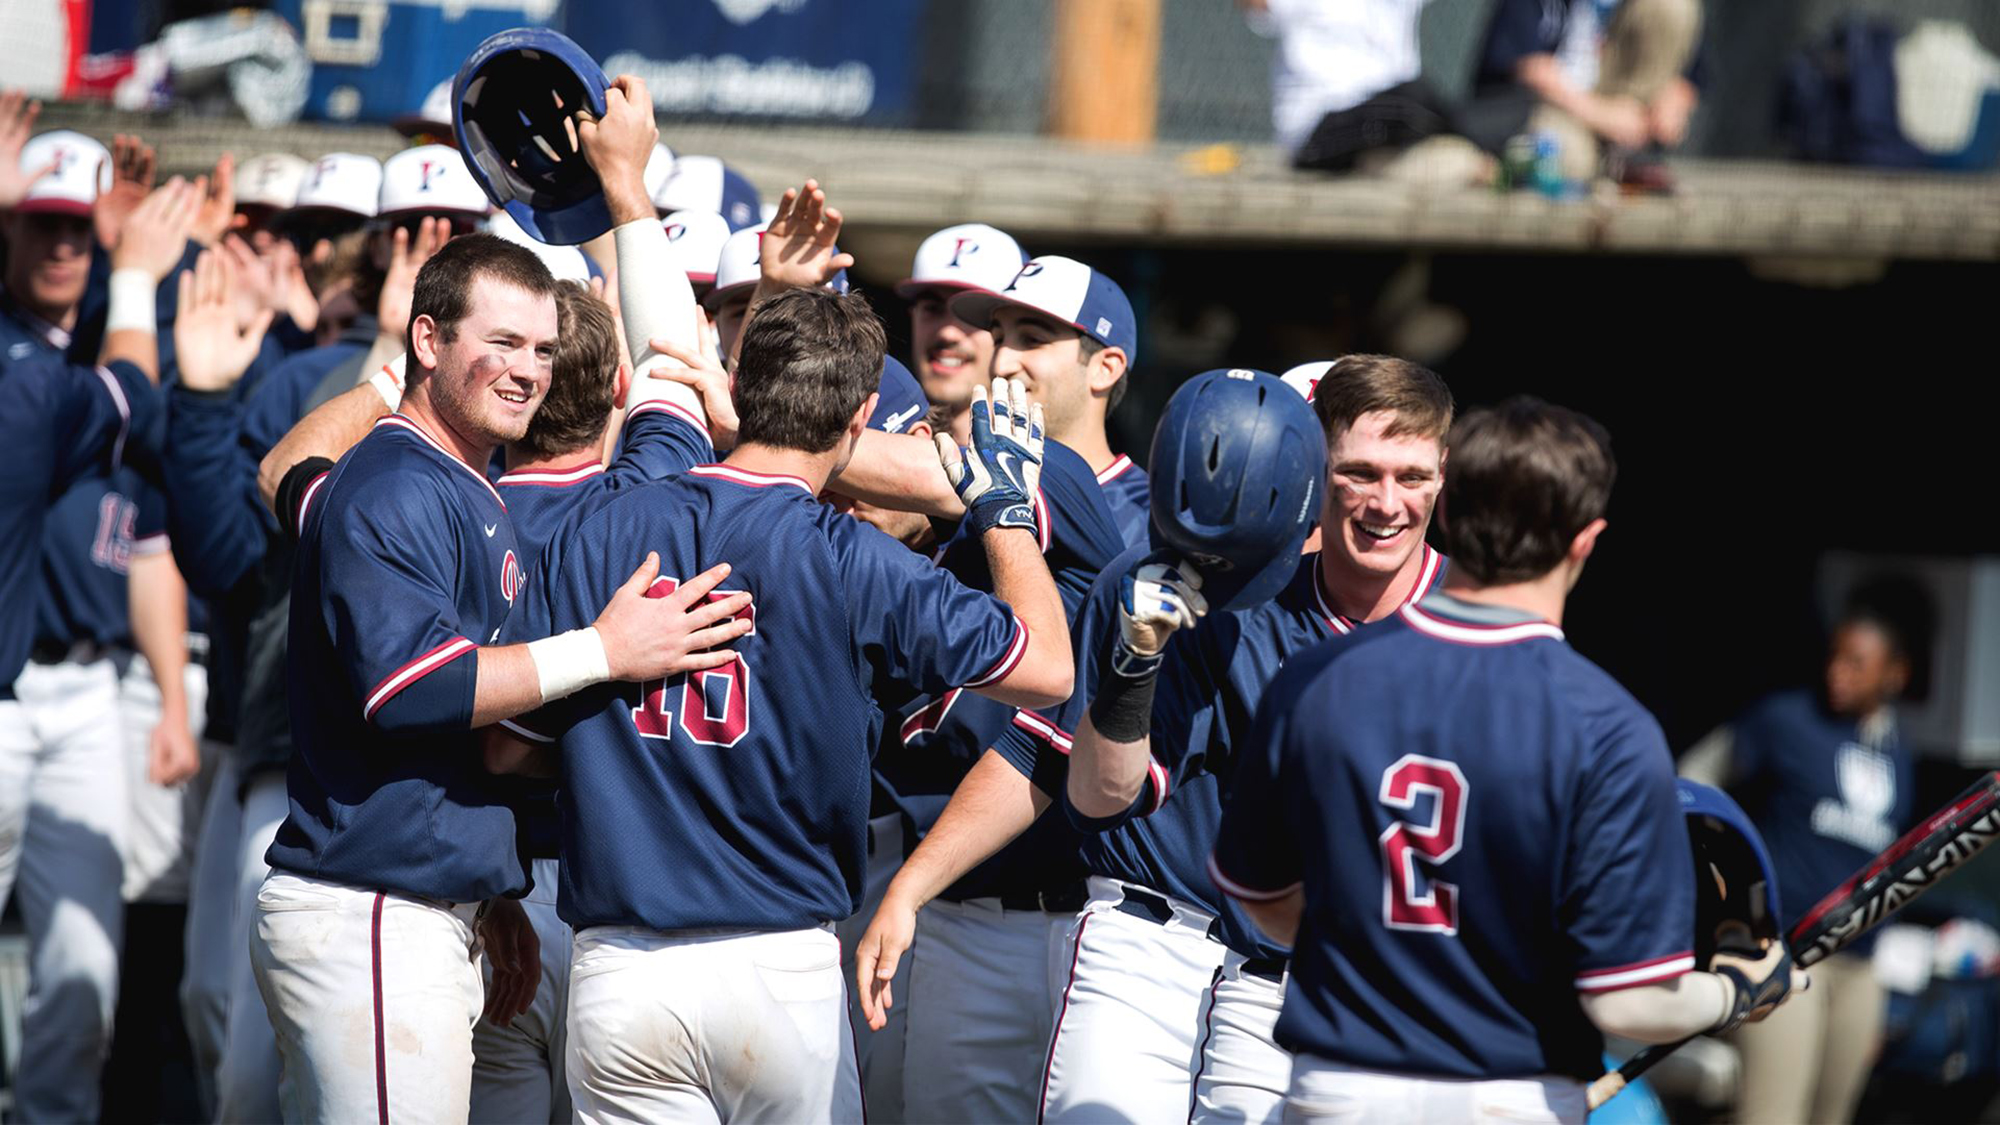 Players on the Penn baseball team celebrate and high five in a group.